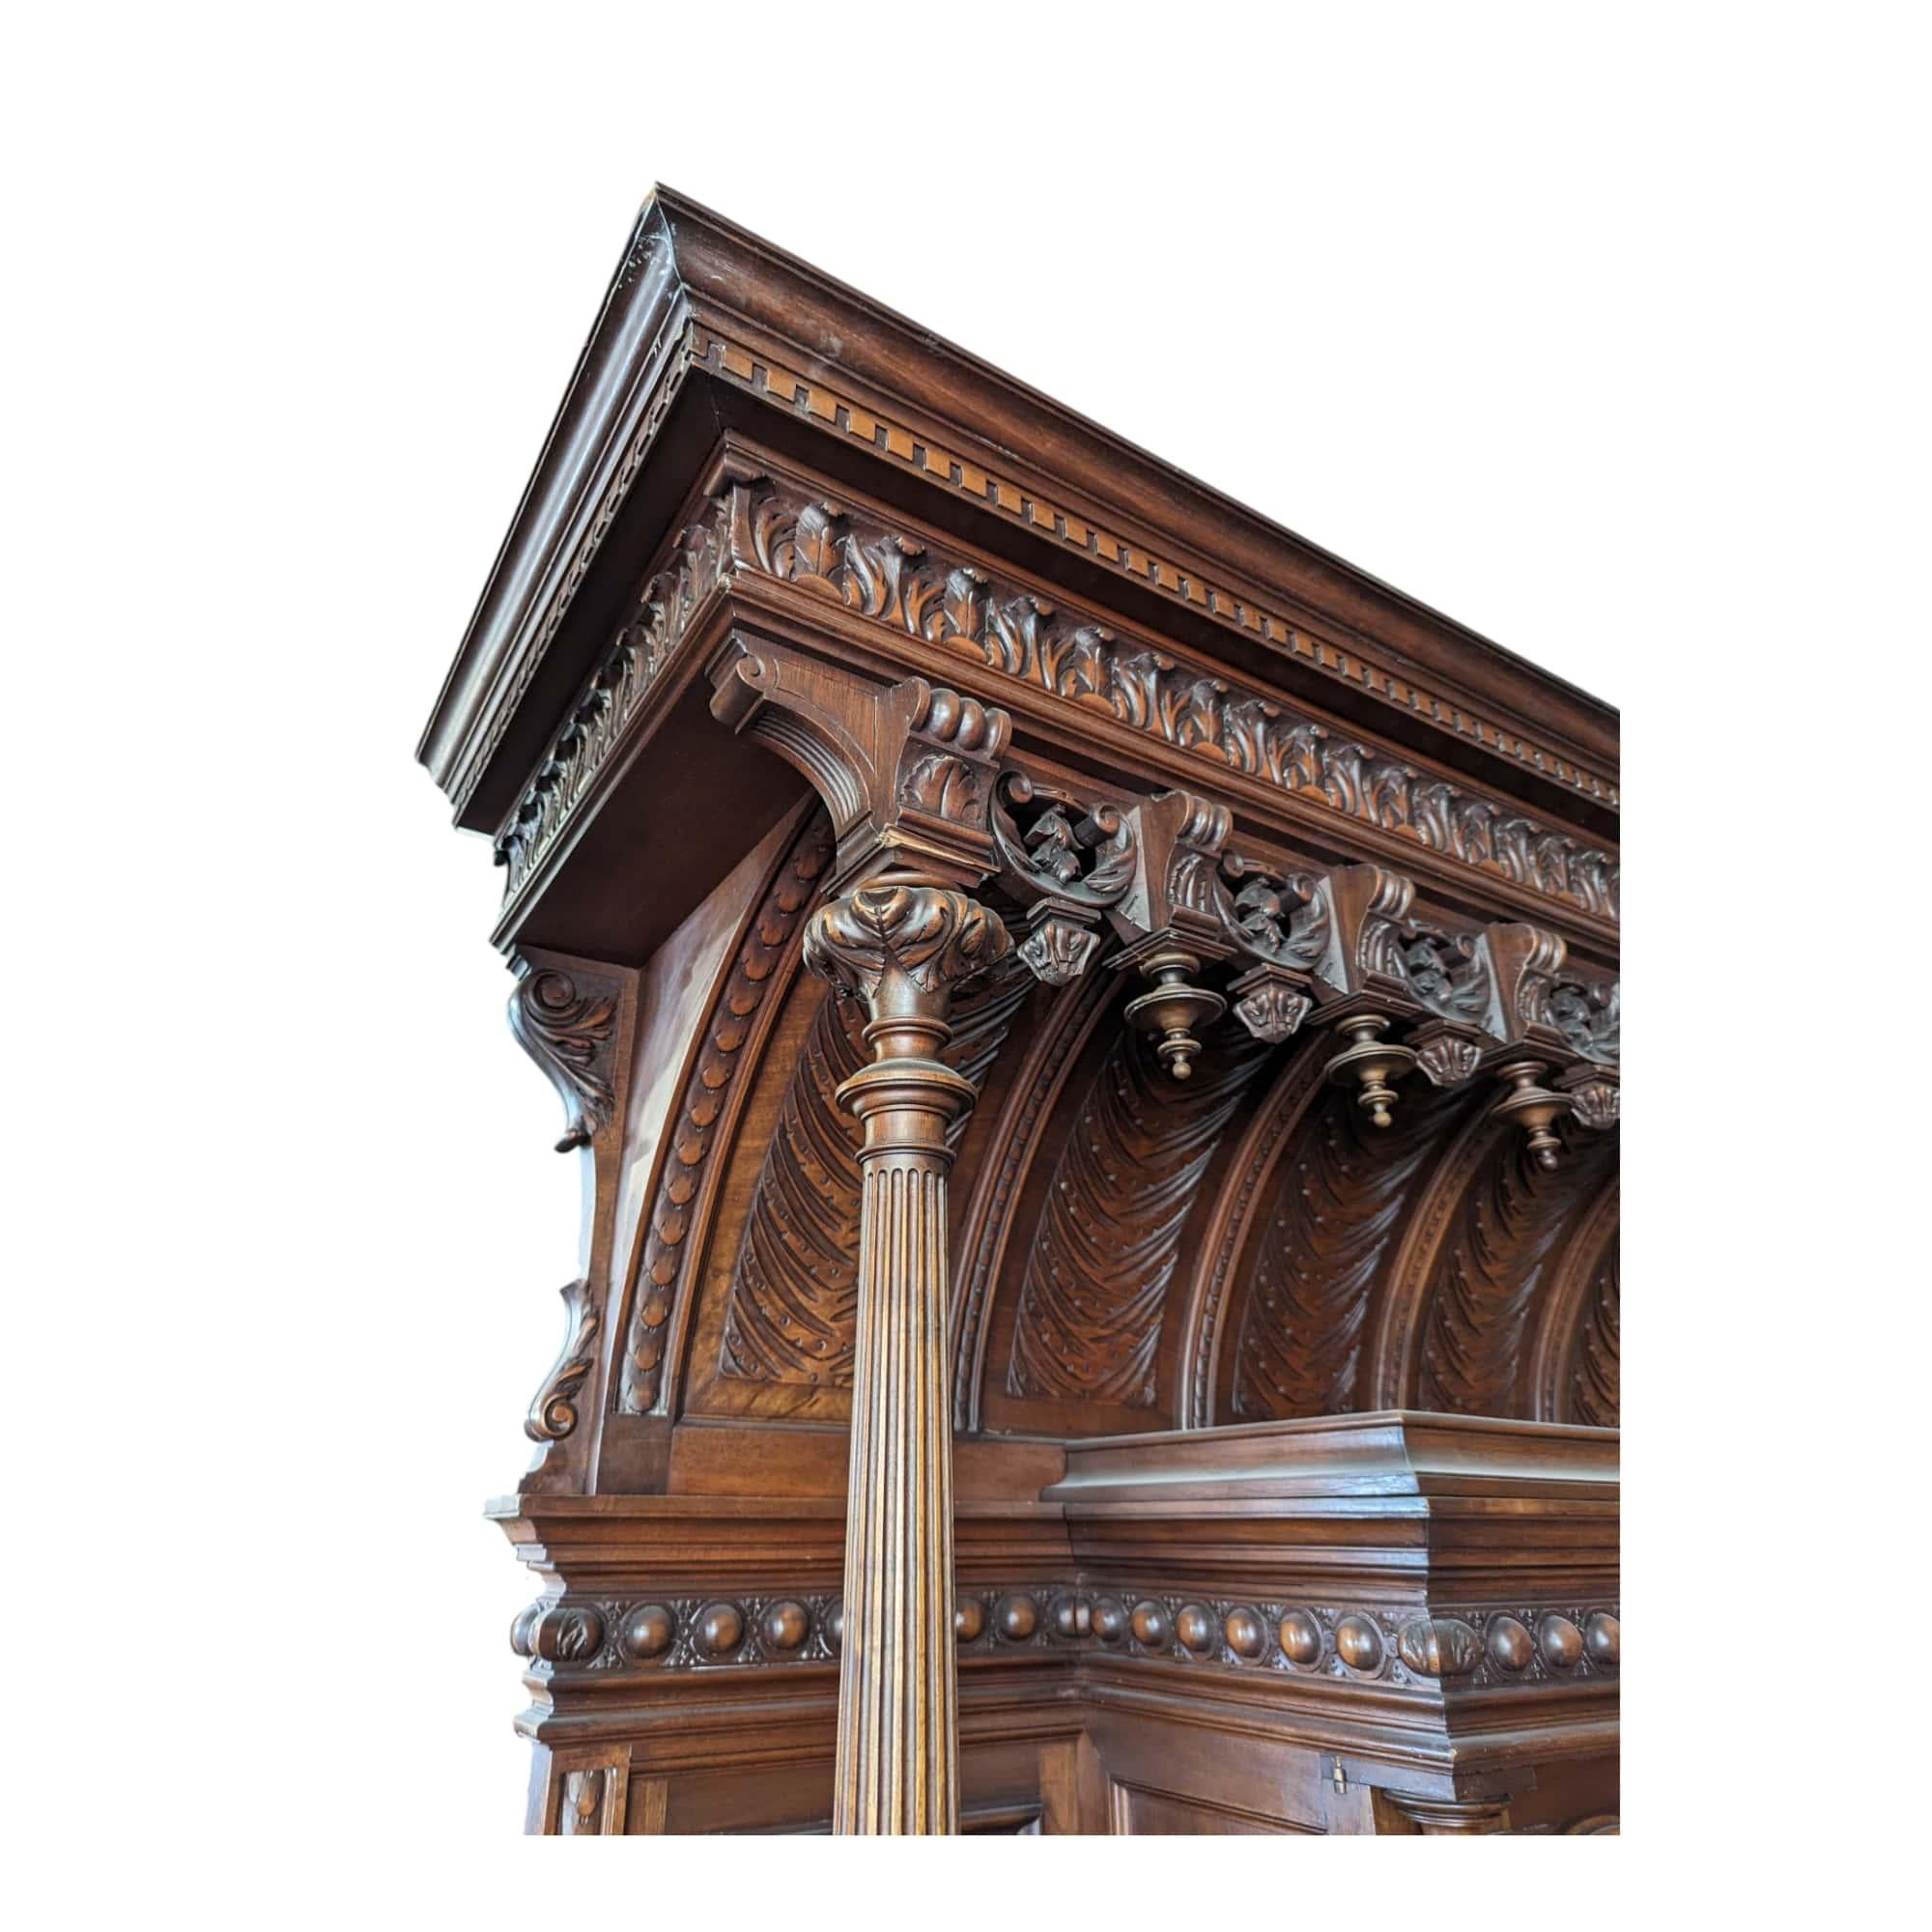 Coming from France. Explore the refinement and authenticity of the Renaissance era with this impressive walnut sideboard and server, made with exceptional craftsmanship in the famous Faubourg Saint Antoine.

This imposing piece of furniture